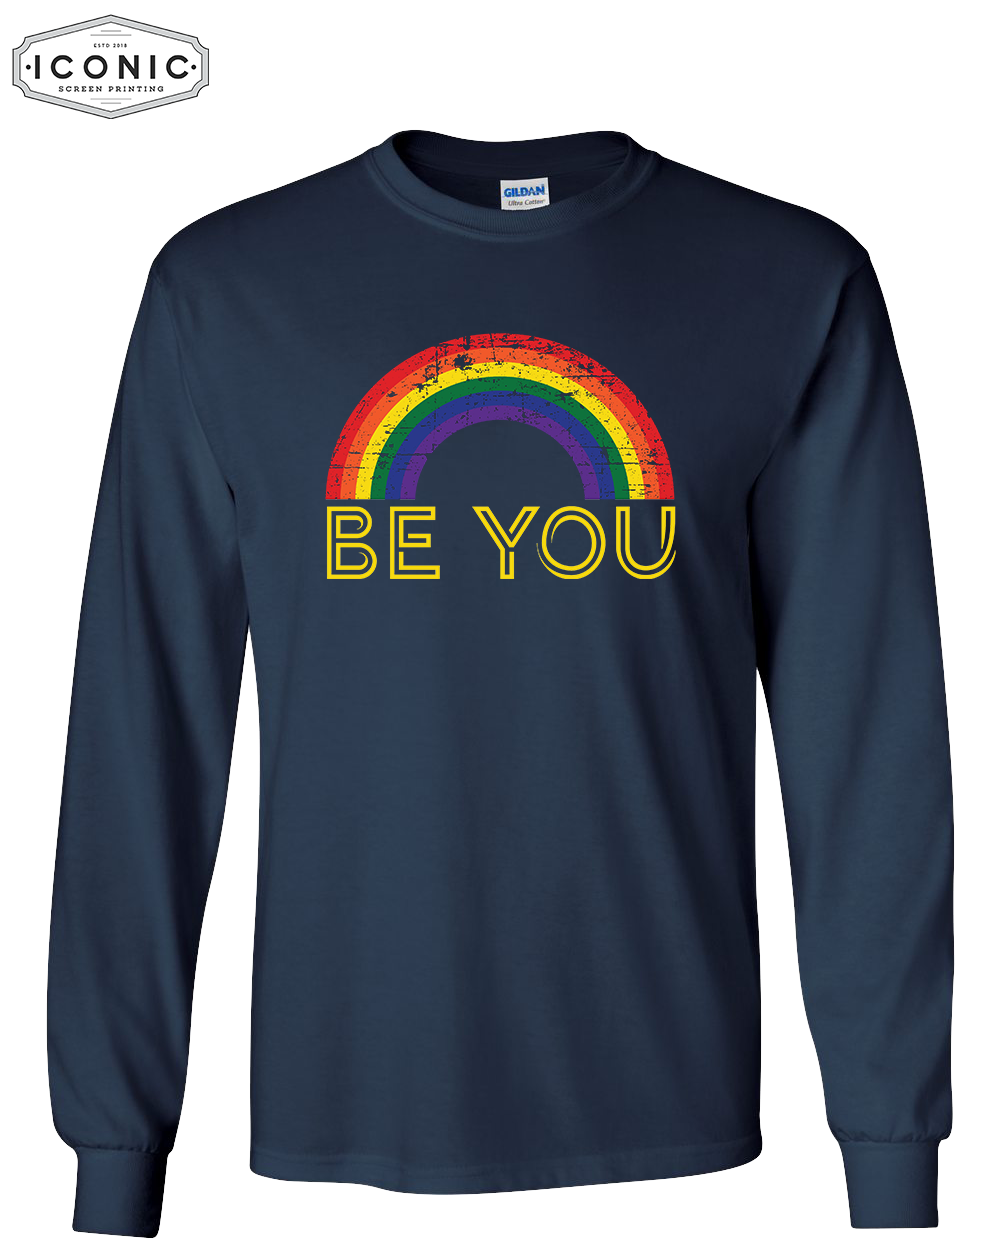 Be You - Ultra Cotton Long Sleeve